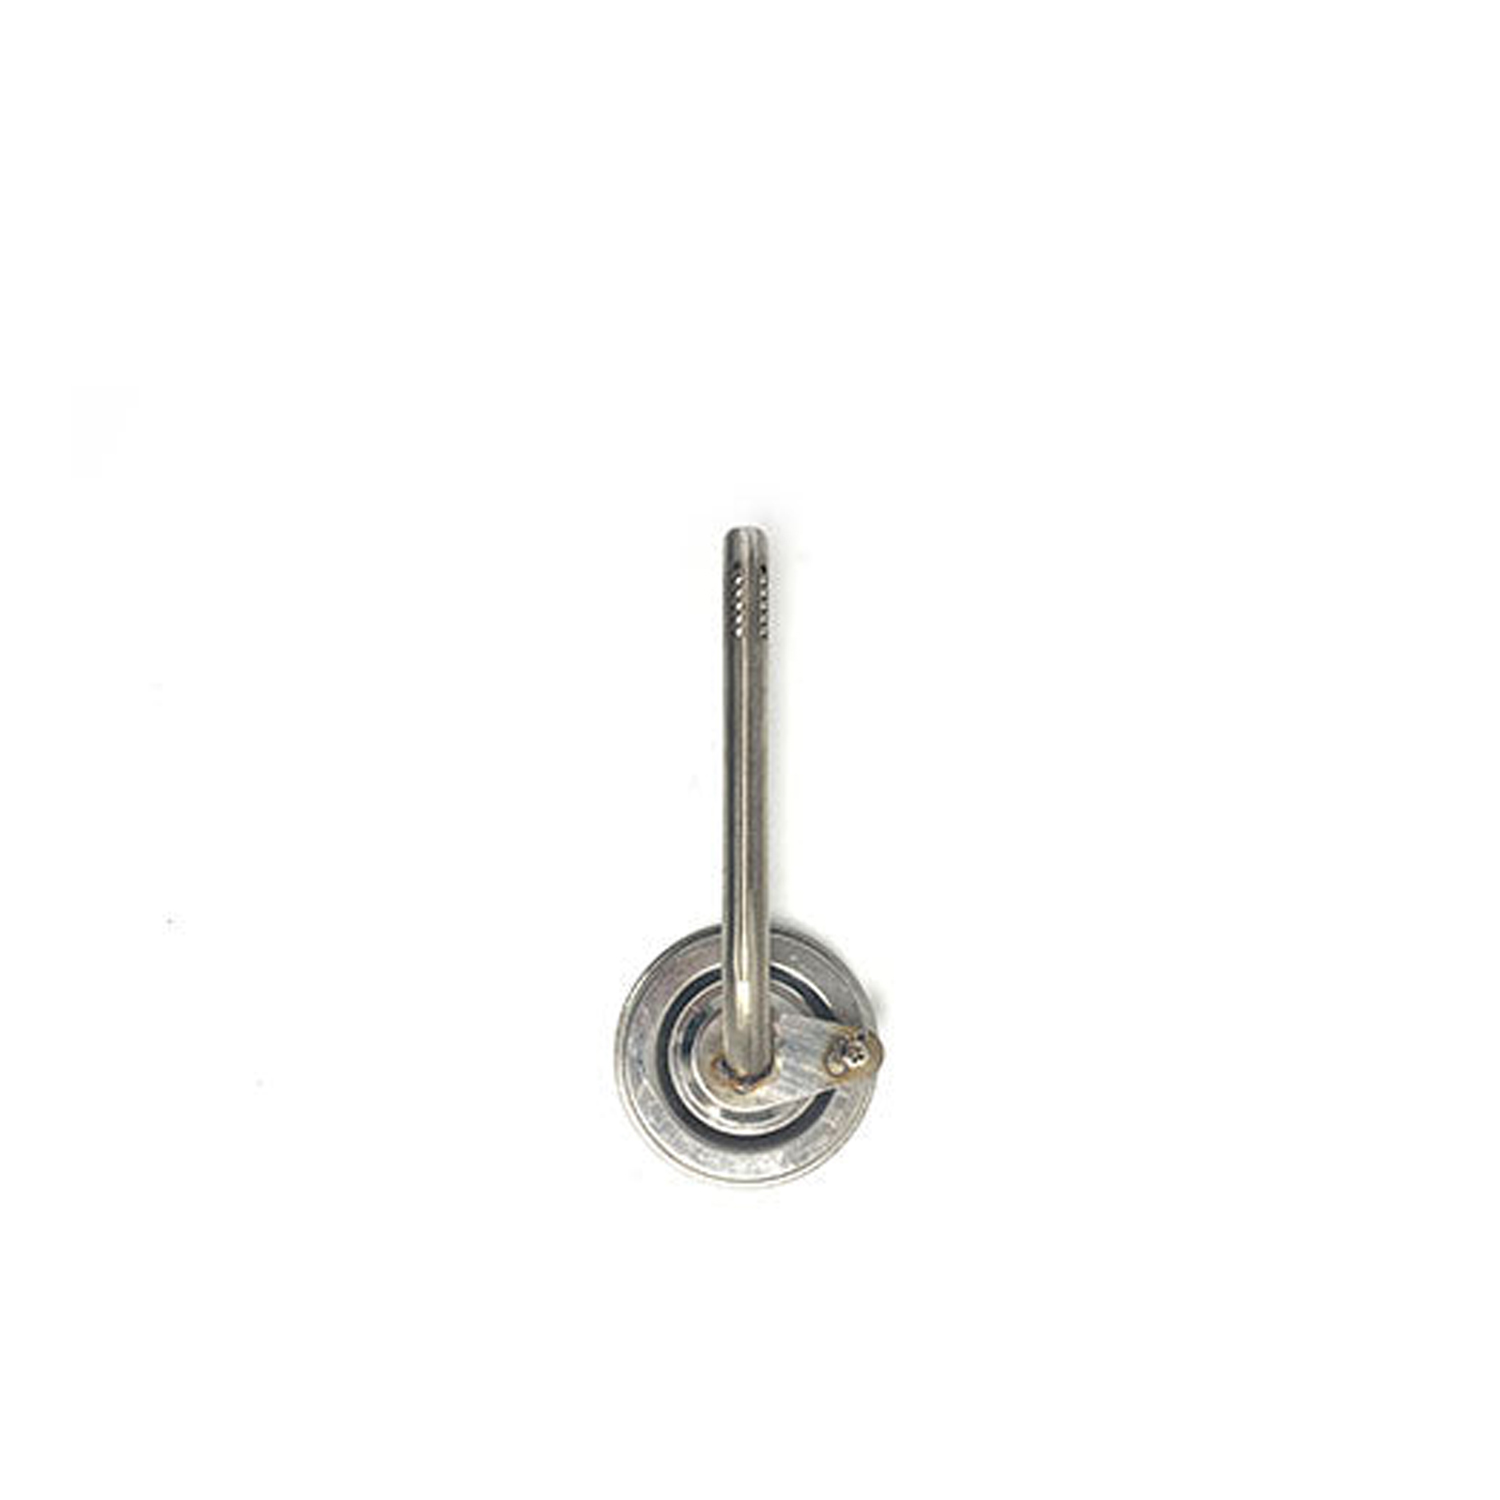 Burner with Screw for Masterbuilt Gas Smokers-YAOAWE